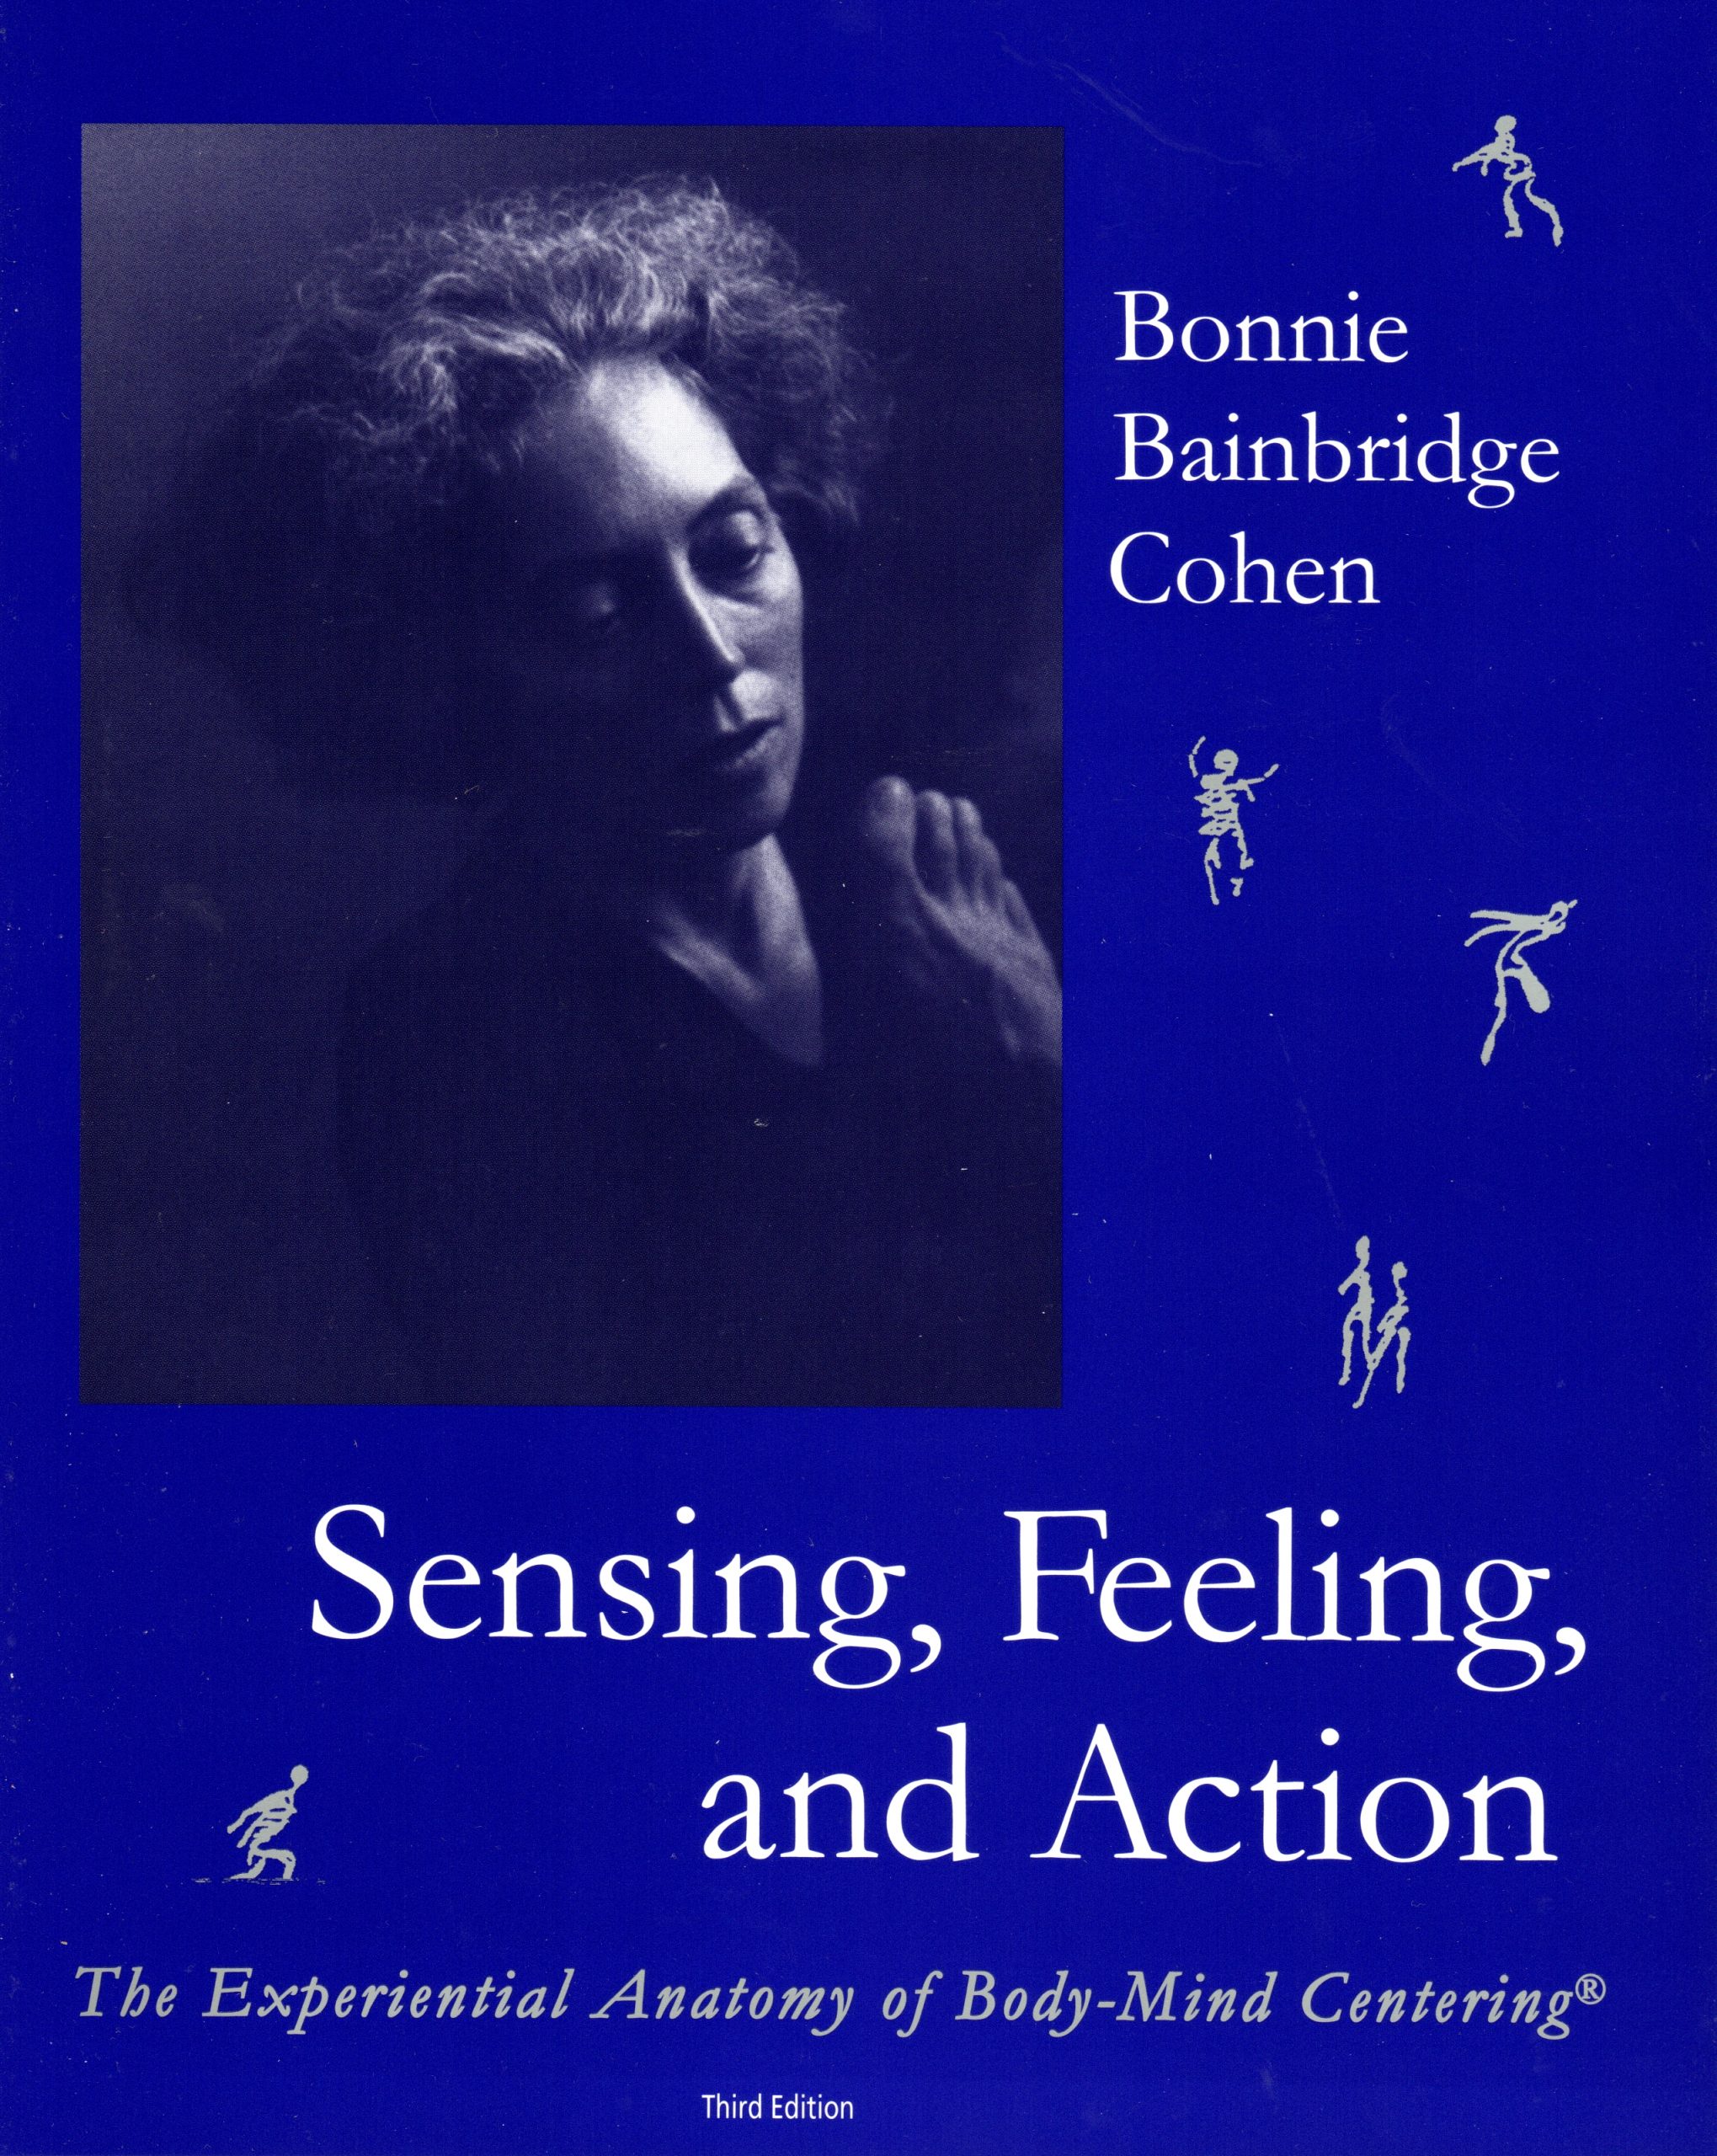 Sensing, Feeling, and Action - Body-Mind Centering®